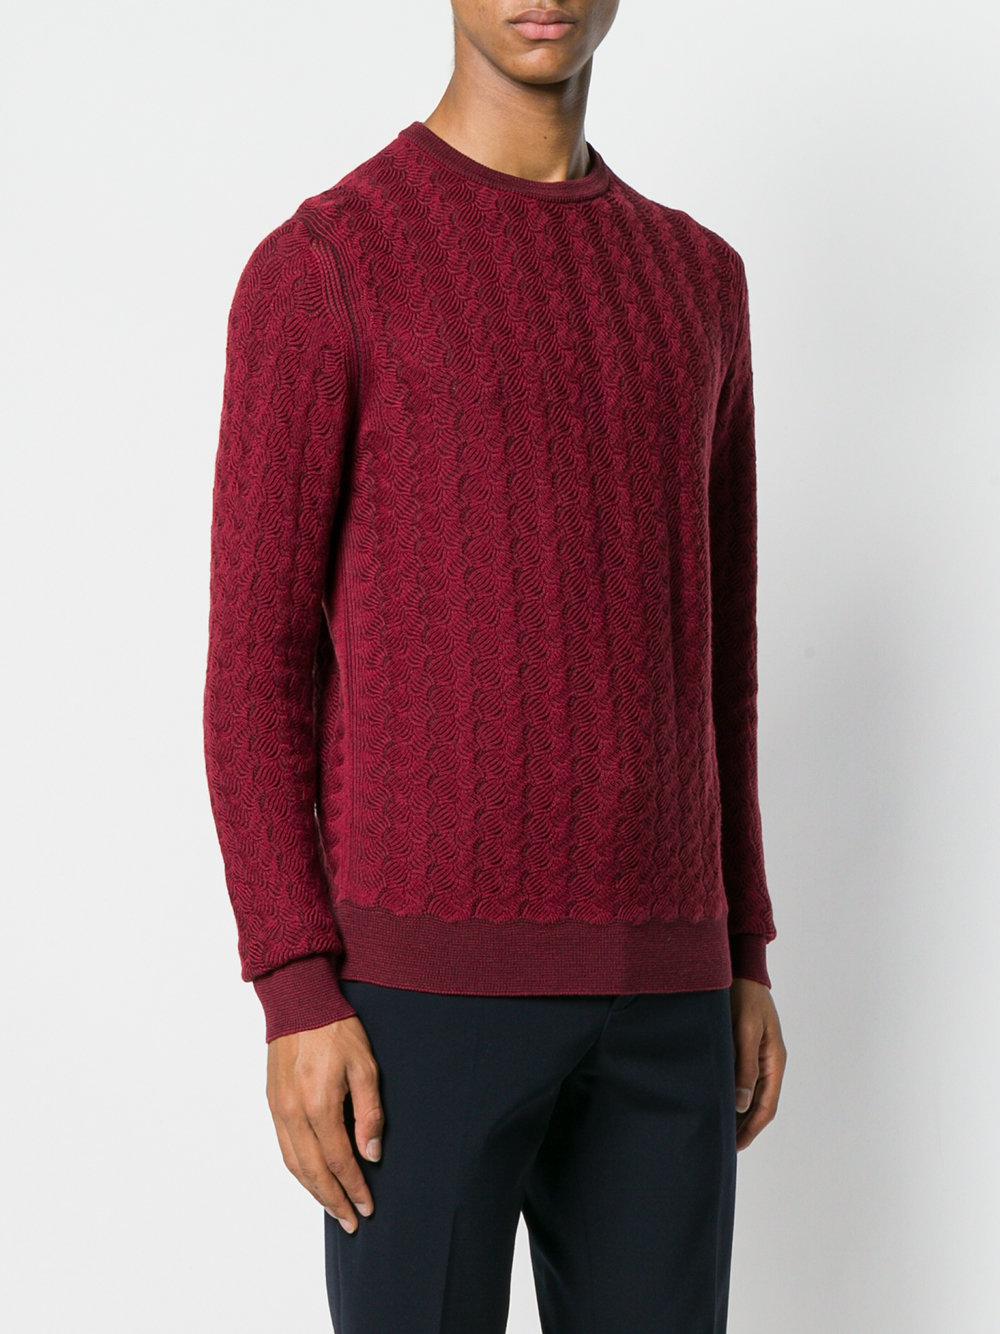 Etro Wool Woven Patterned Jumper in Red for Men - Lyst